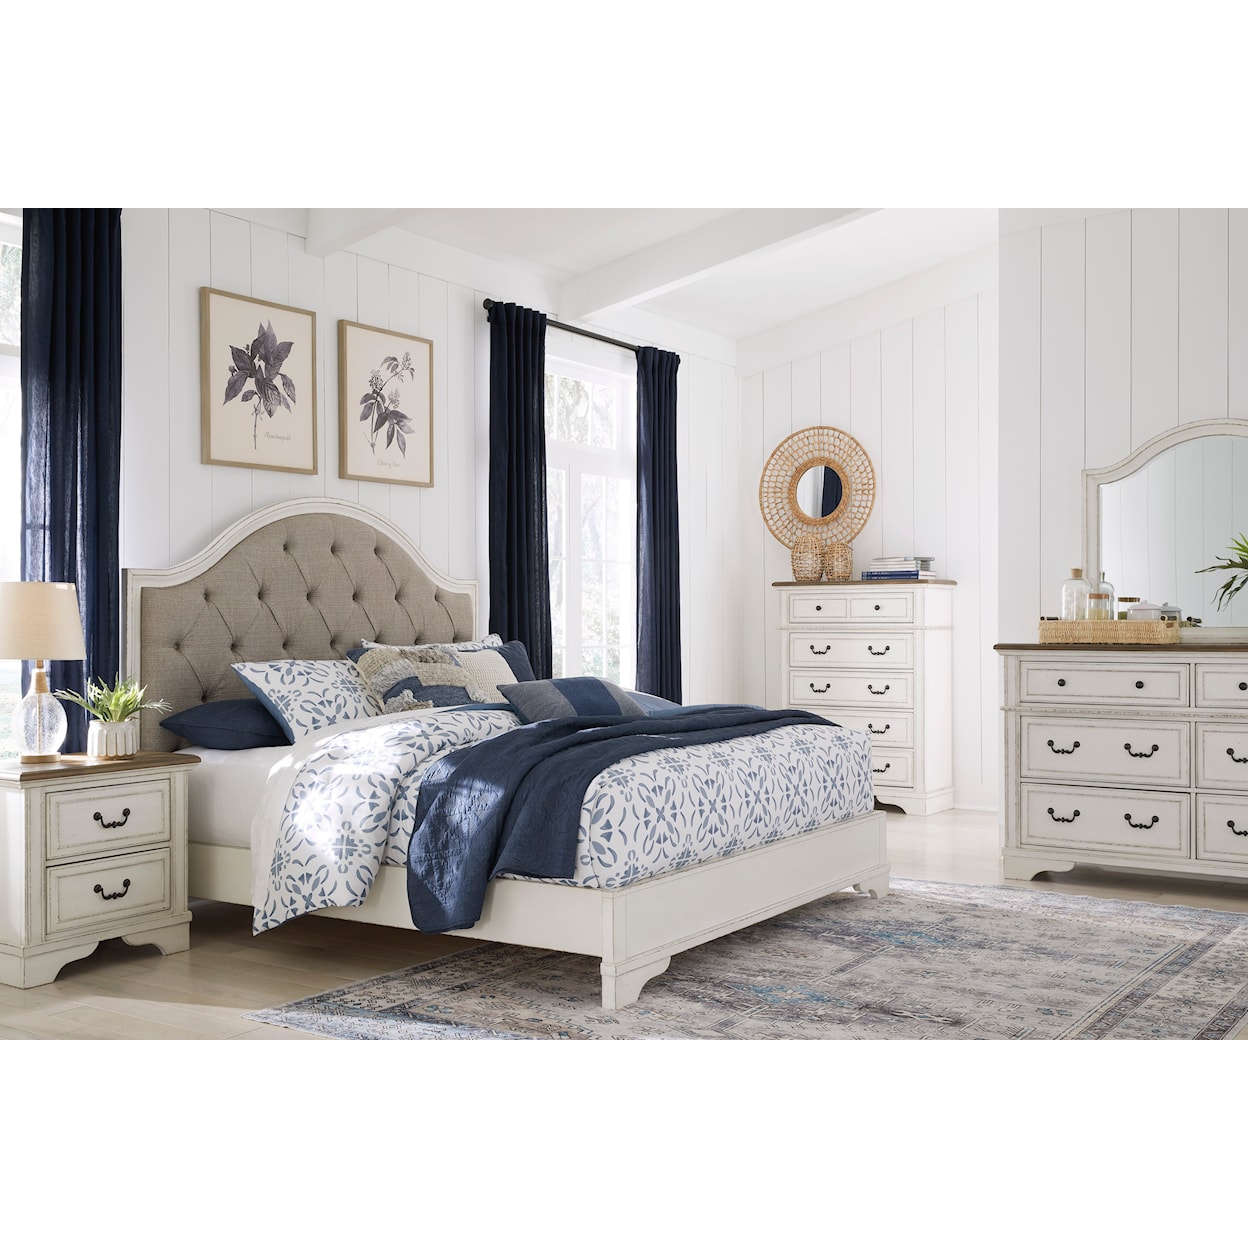 Signature Design by Ashley Furniture Brollyn Queen Bedroom Set